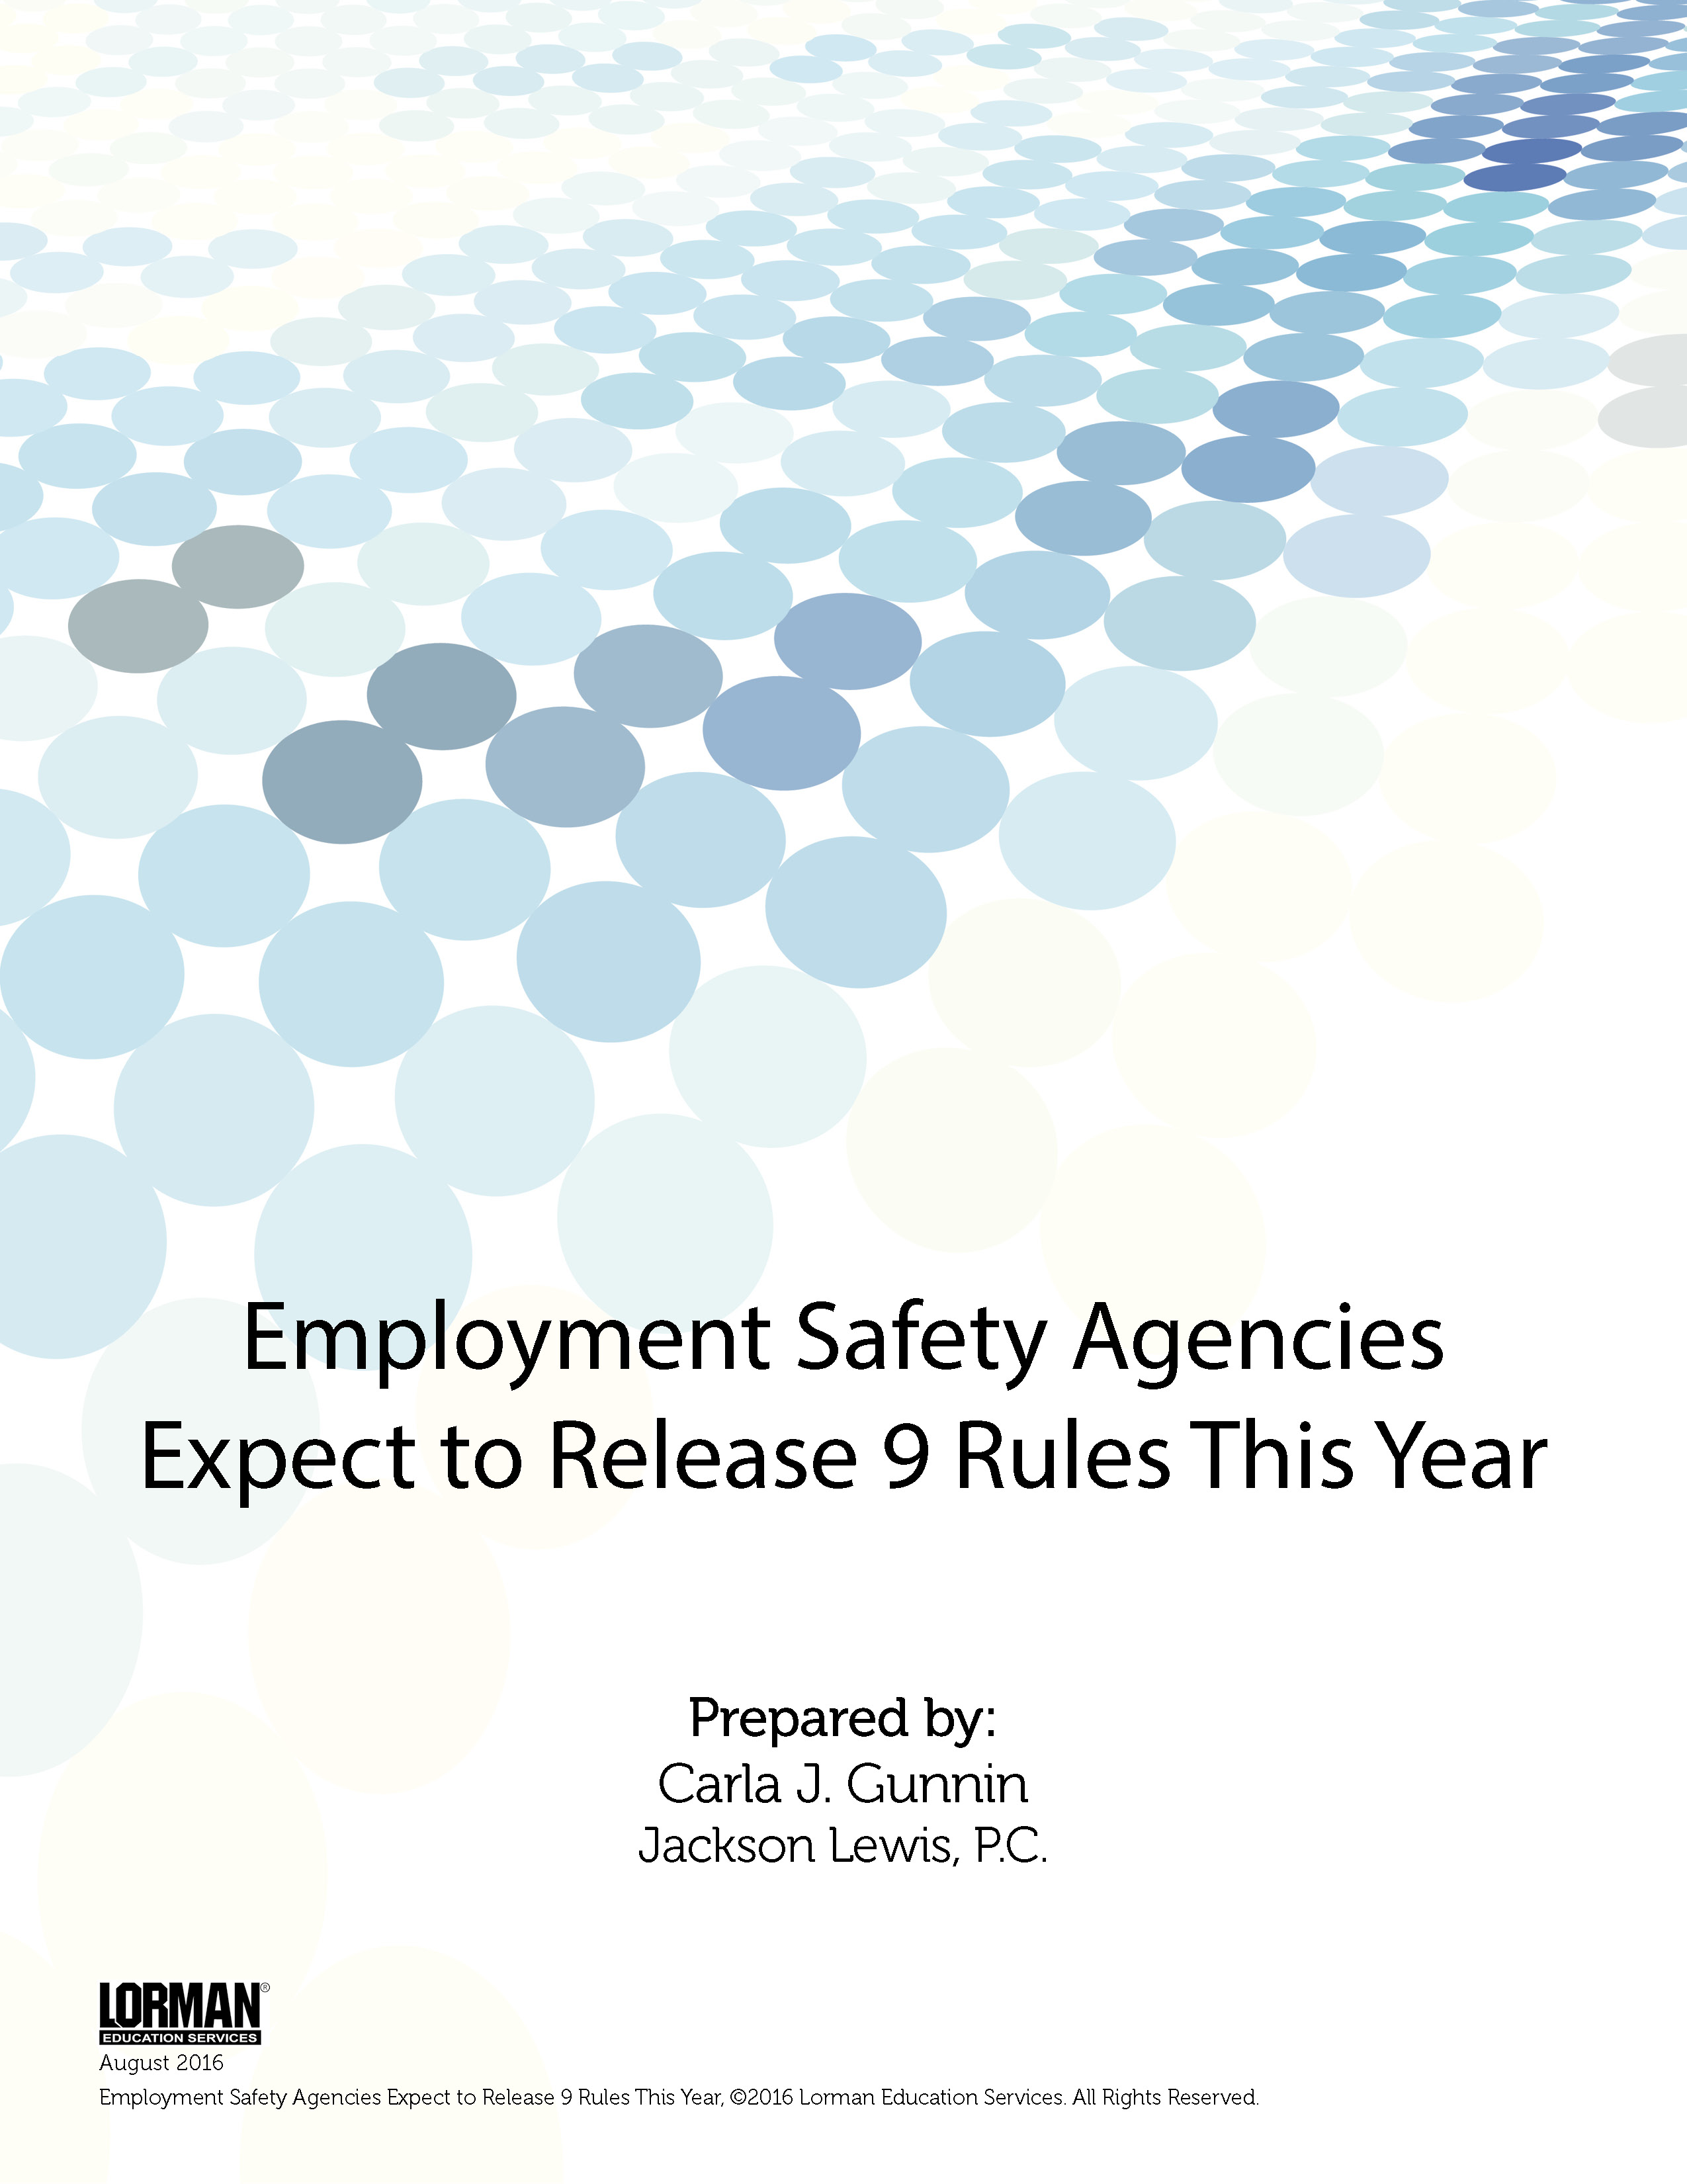 Employment Safety Agencies Expect to Release 9 Rules This Year